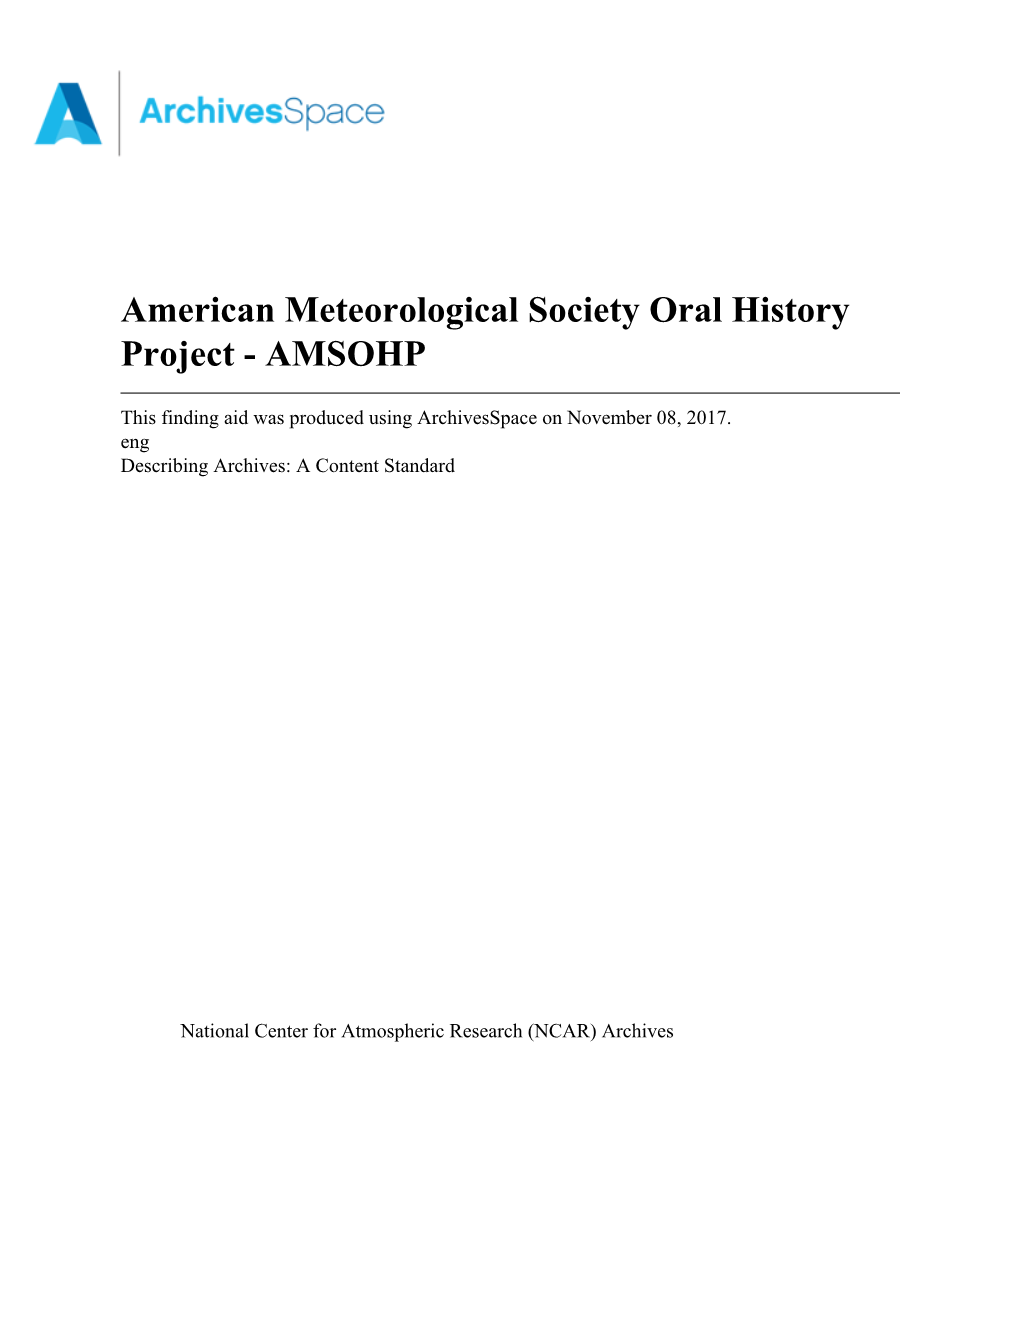 American Meteorological Society Oral History Project - AMSOHP